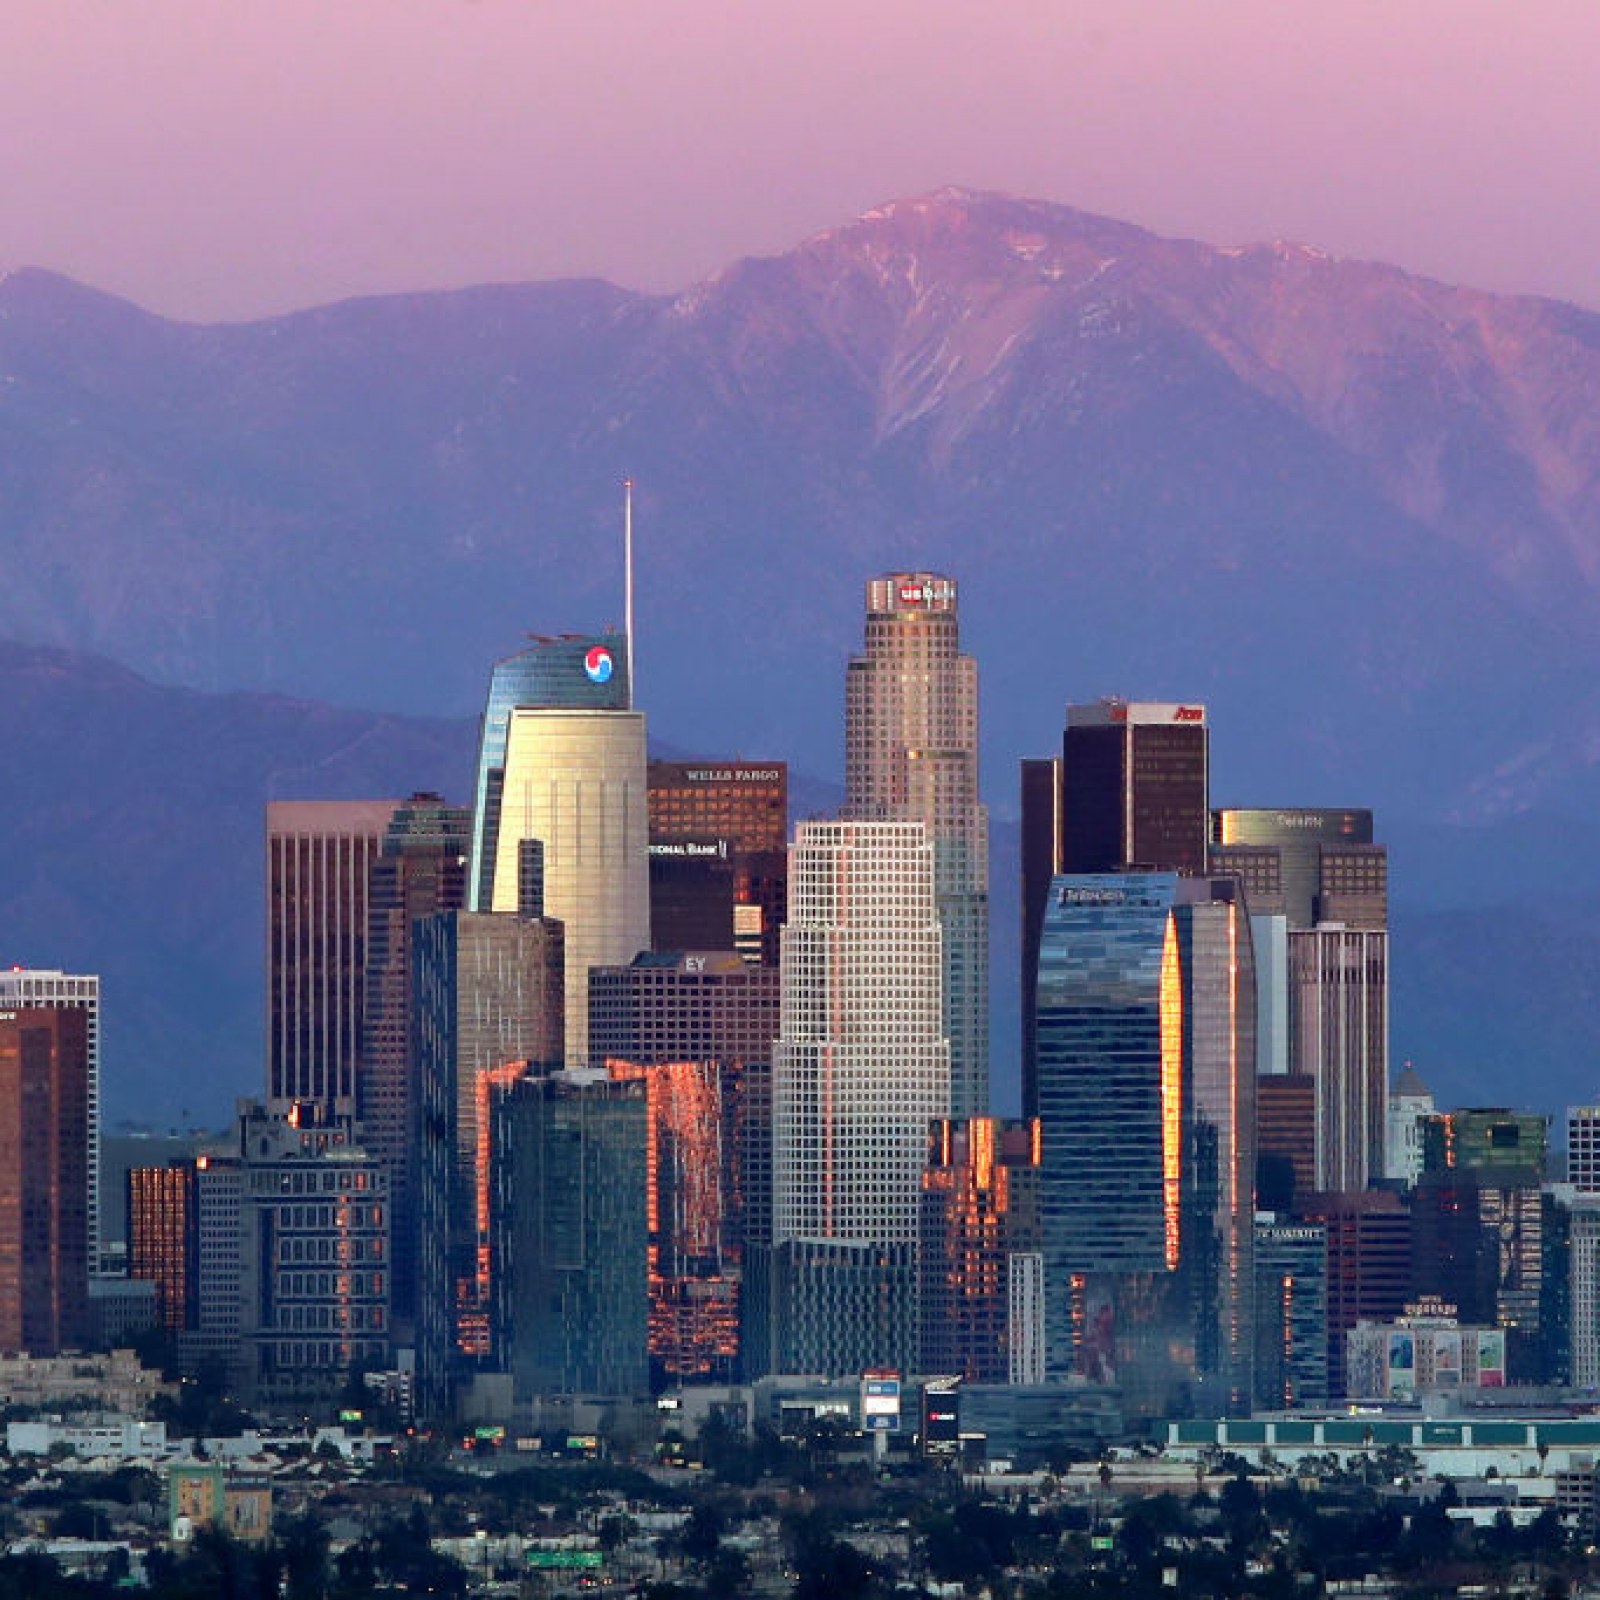 Los Angeles Considers Giving $1,000 Every Month for Three Years to